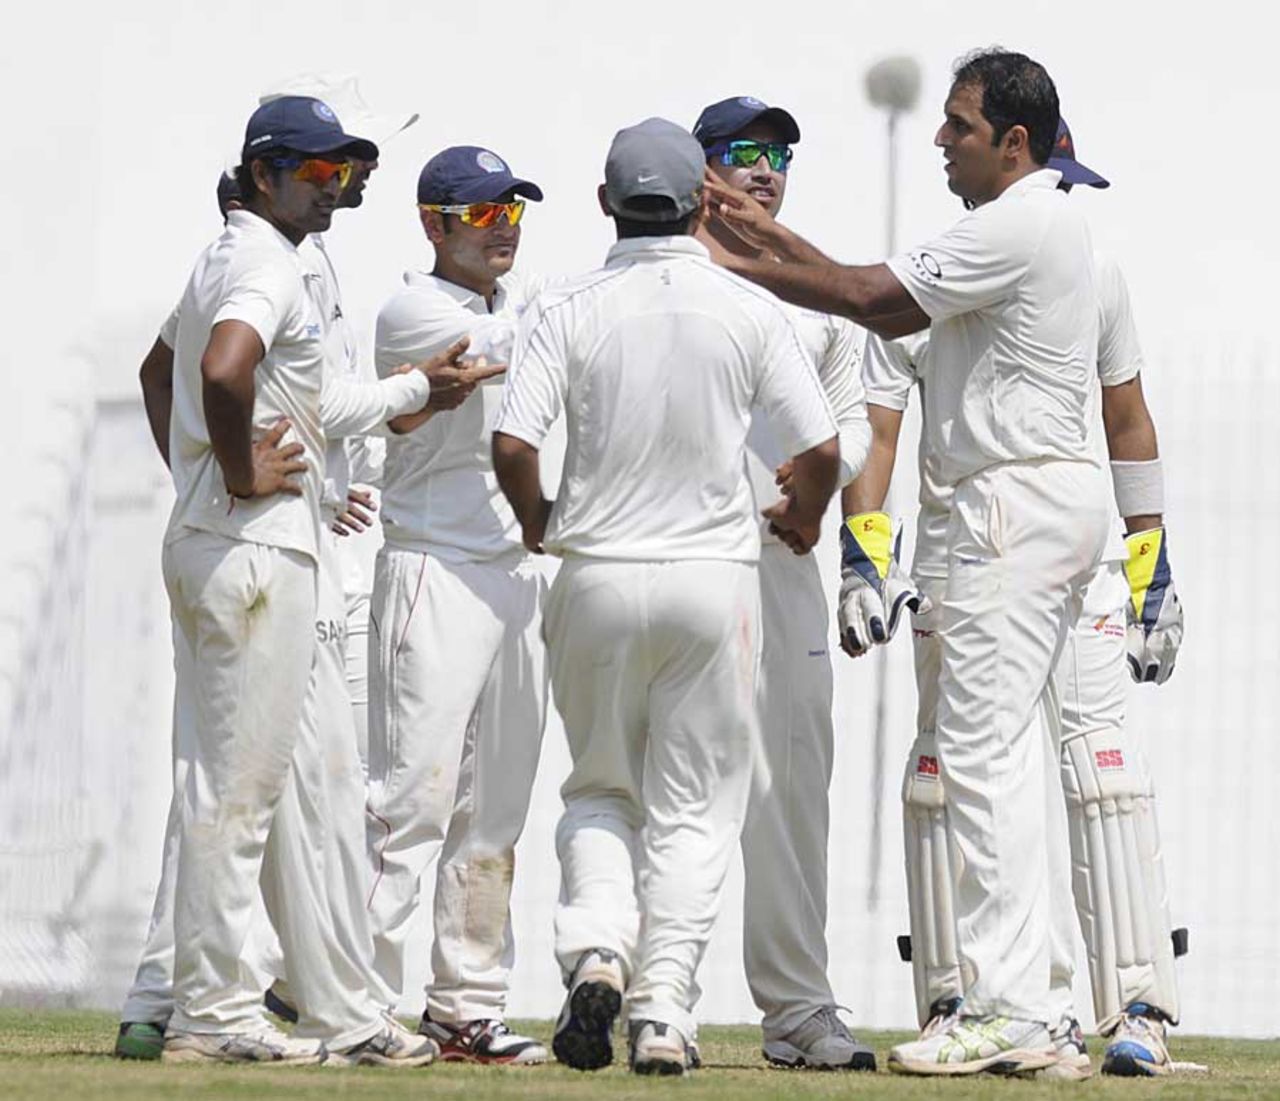 TP Sudhindra celebrates a wicket, South Zone v Central Zone, Duleep Trophy 2011-12 semi-final, 2nd day, February 5, 2012